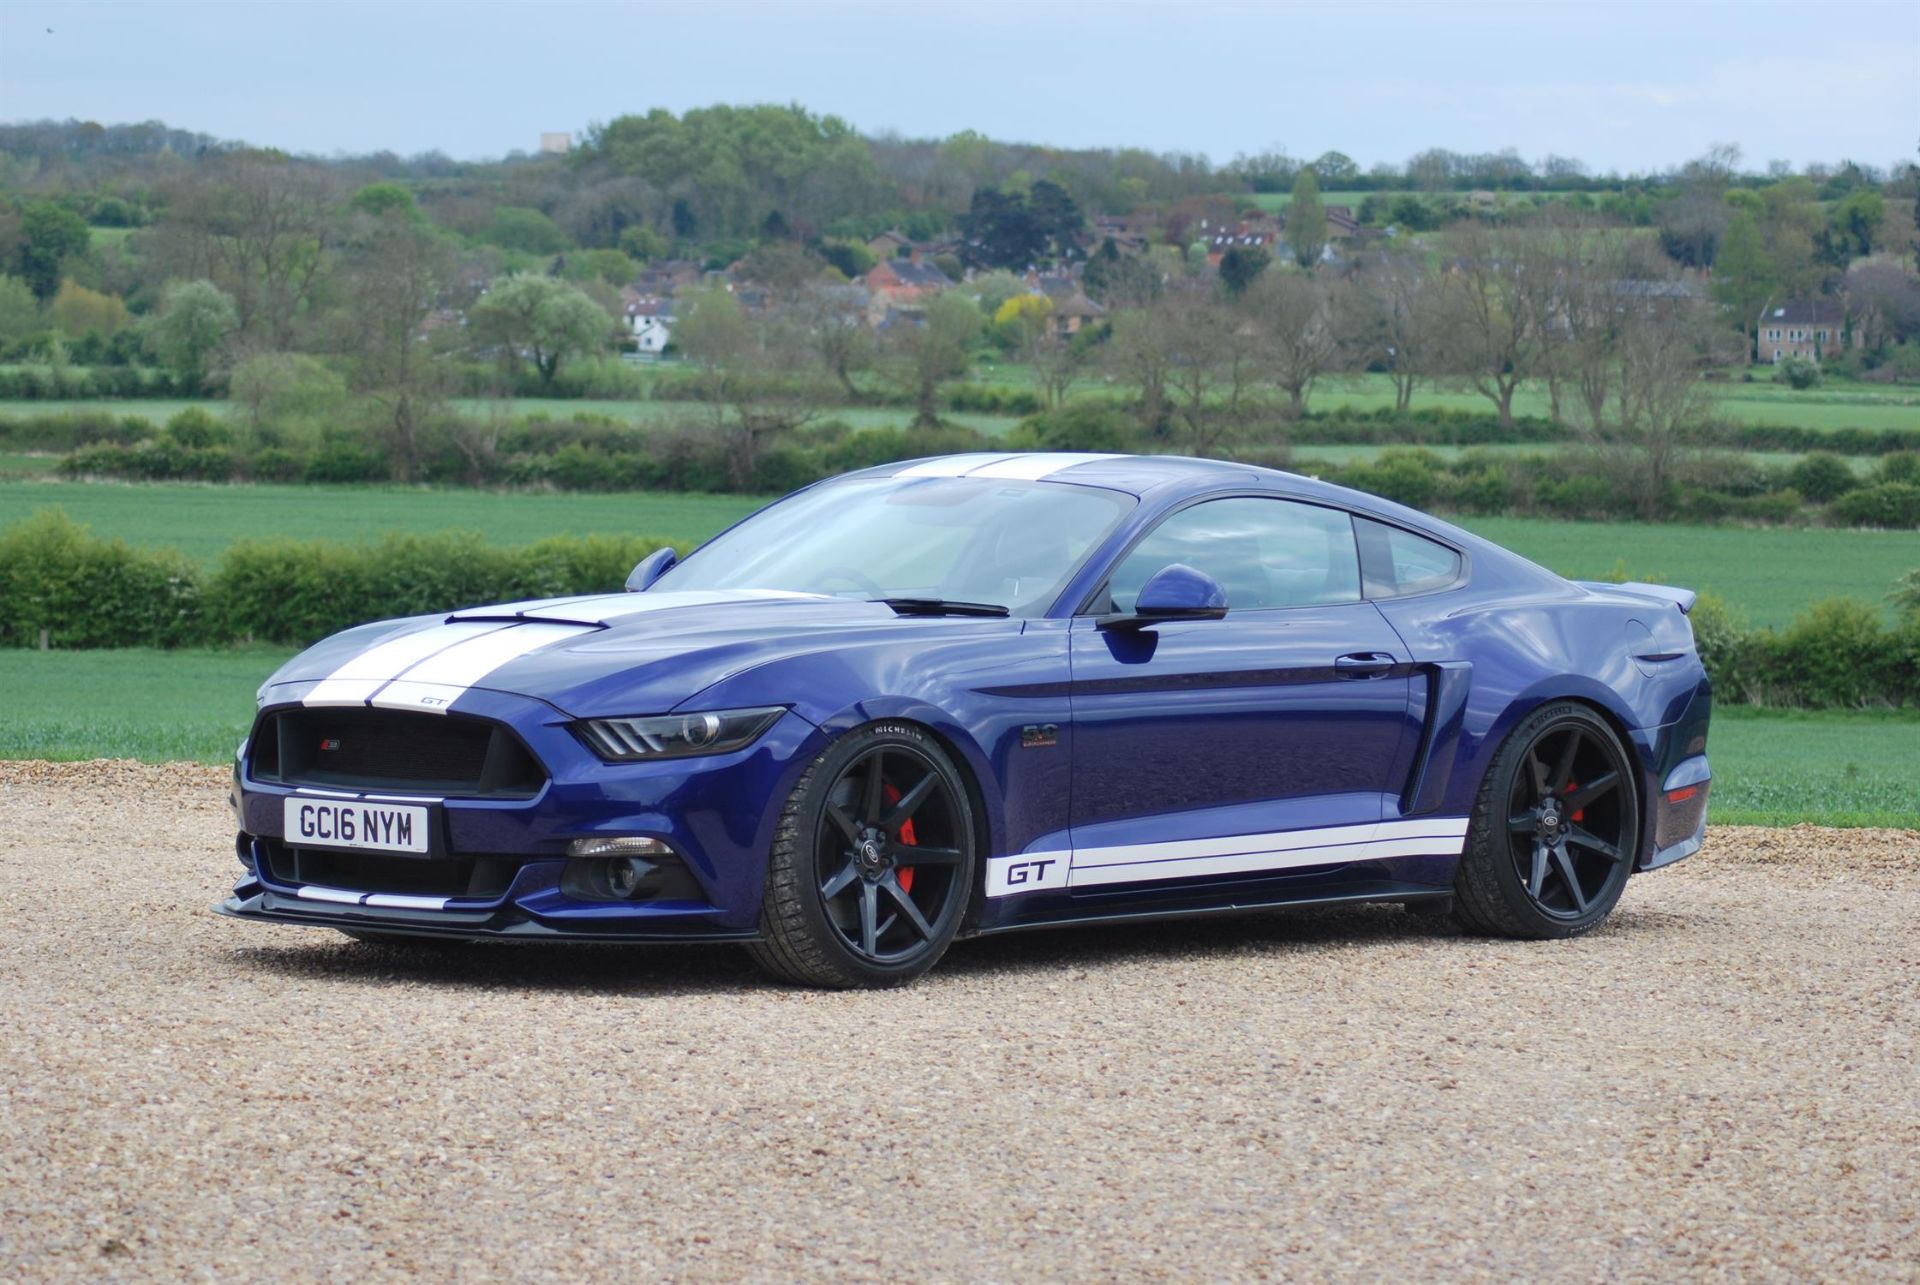 2016 Ford Mustang 5.0-Litre V8 GT S550 Roush Supercharged - Image 9 of 10